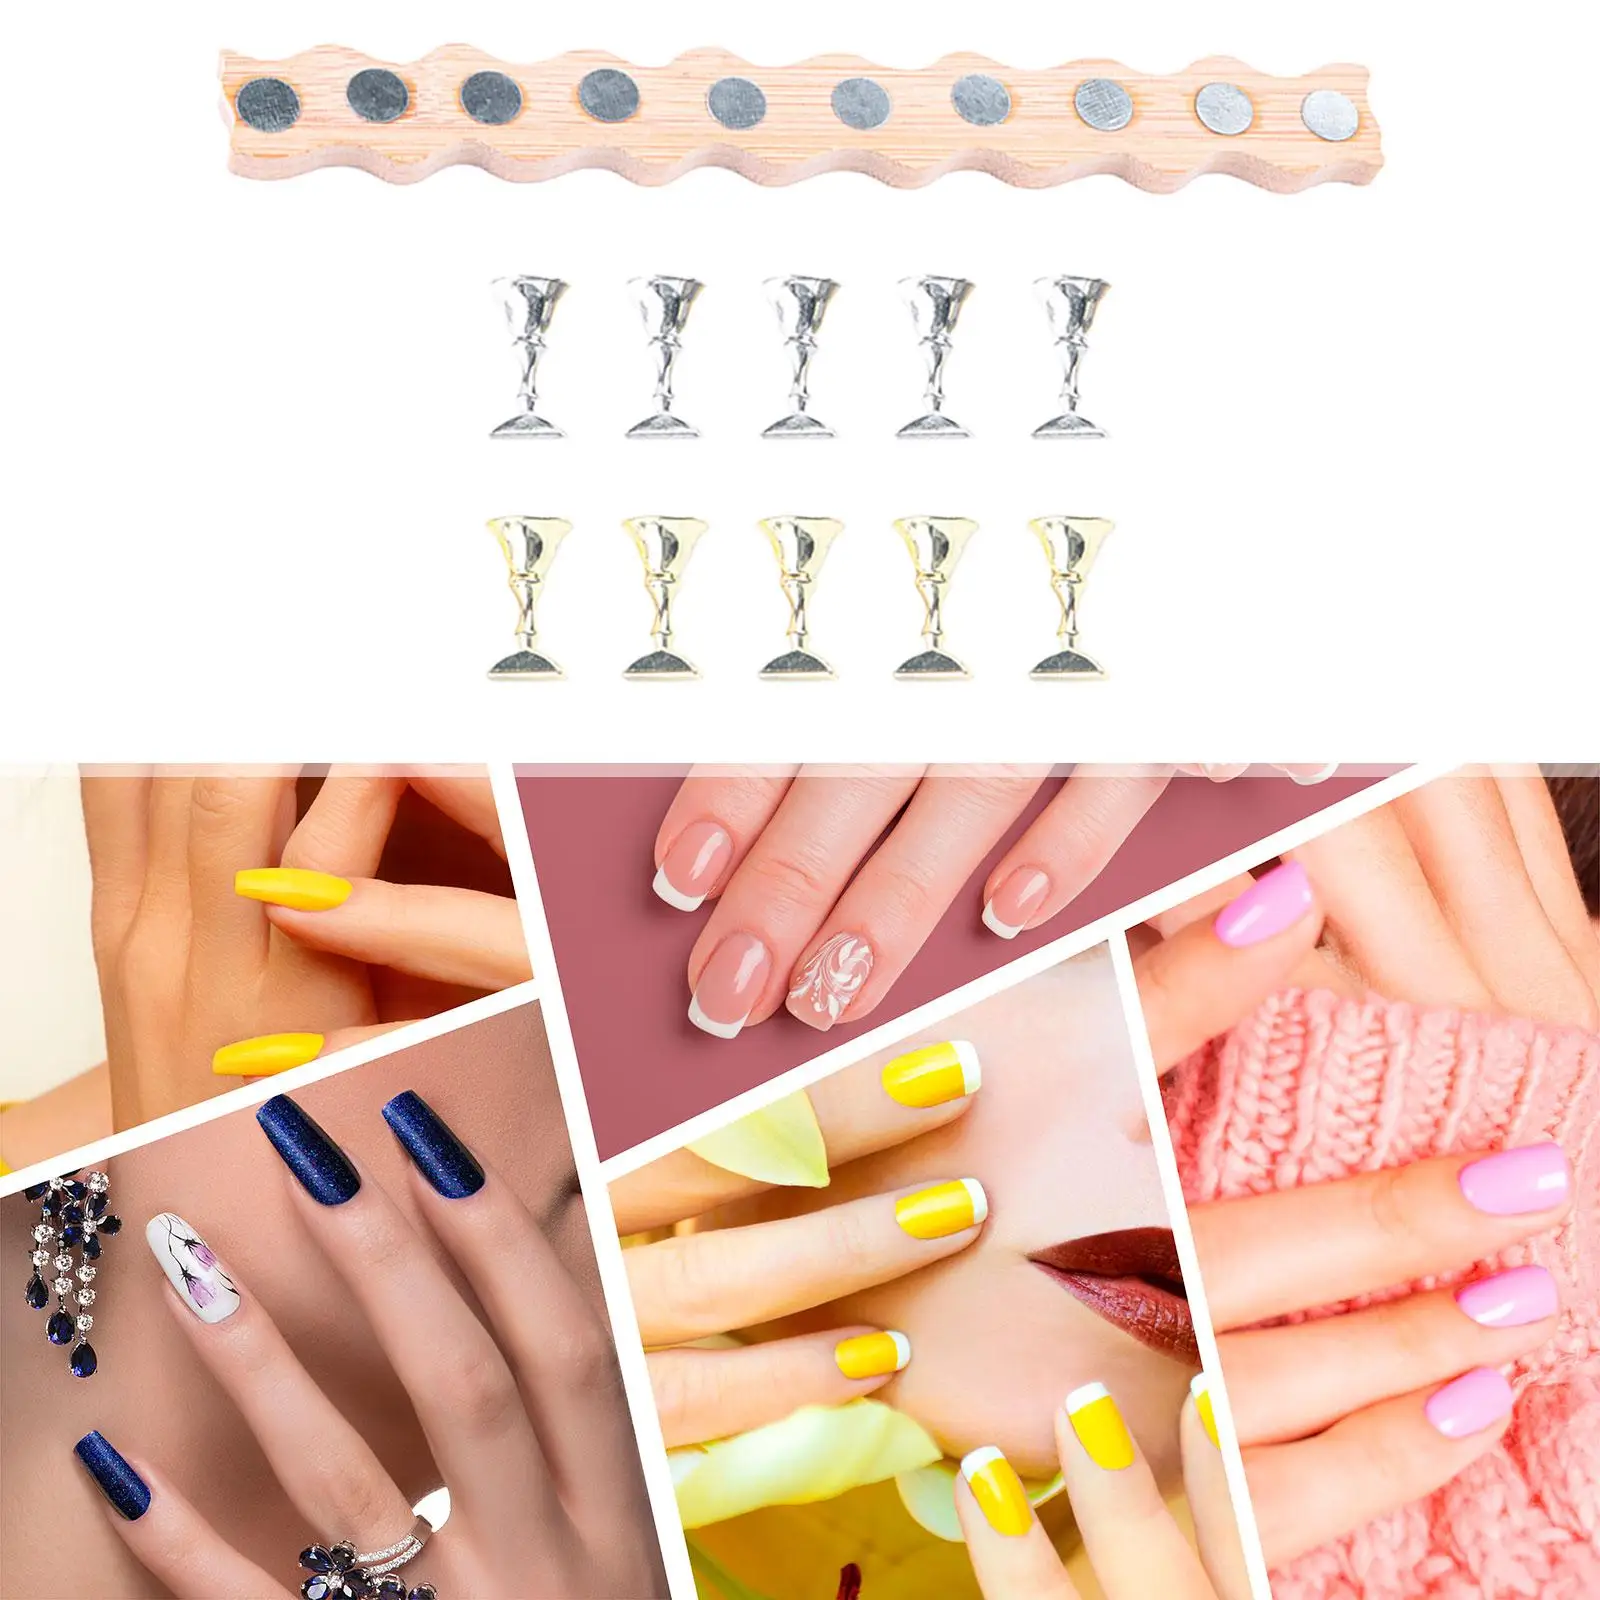 Nail Art Practice Stand Accessories Manicure Tool Durable Reusable Fingernail Display Stands for Beginner Makeup Home Salon DIY